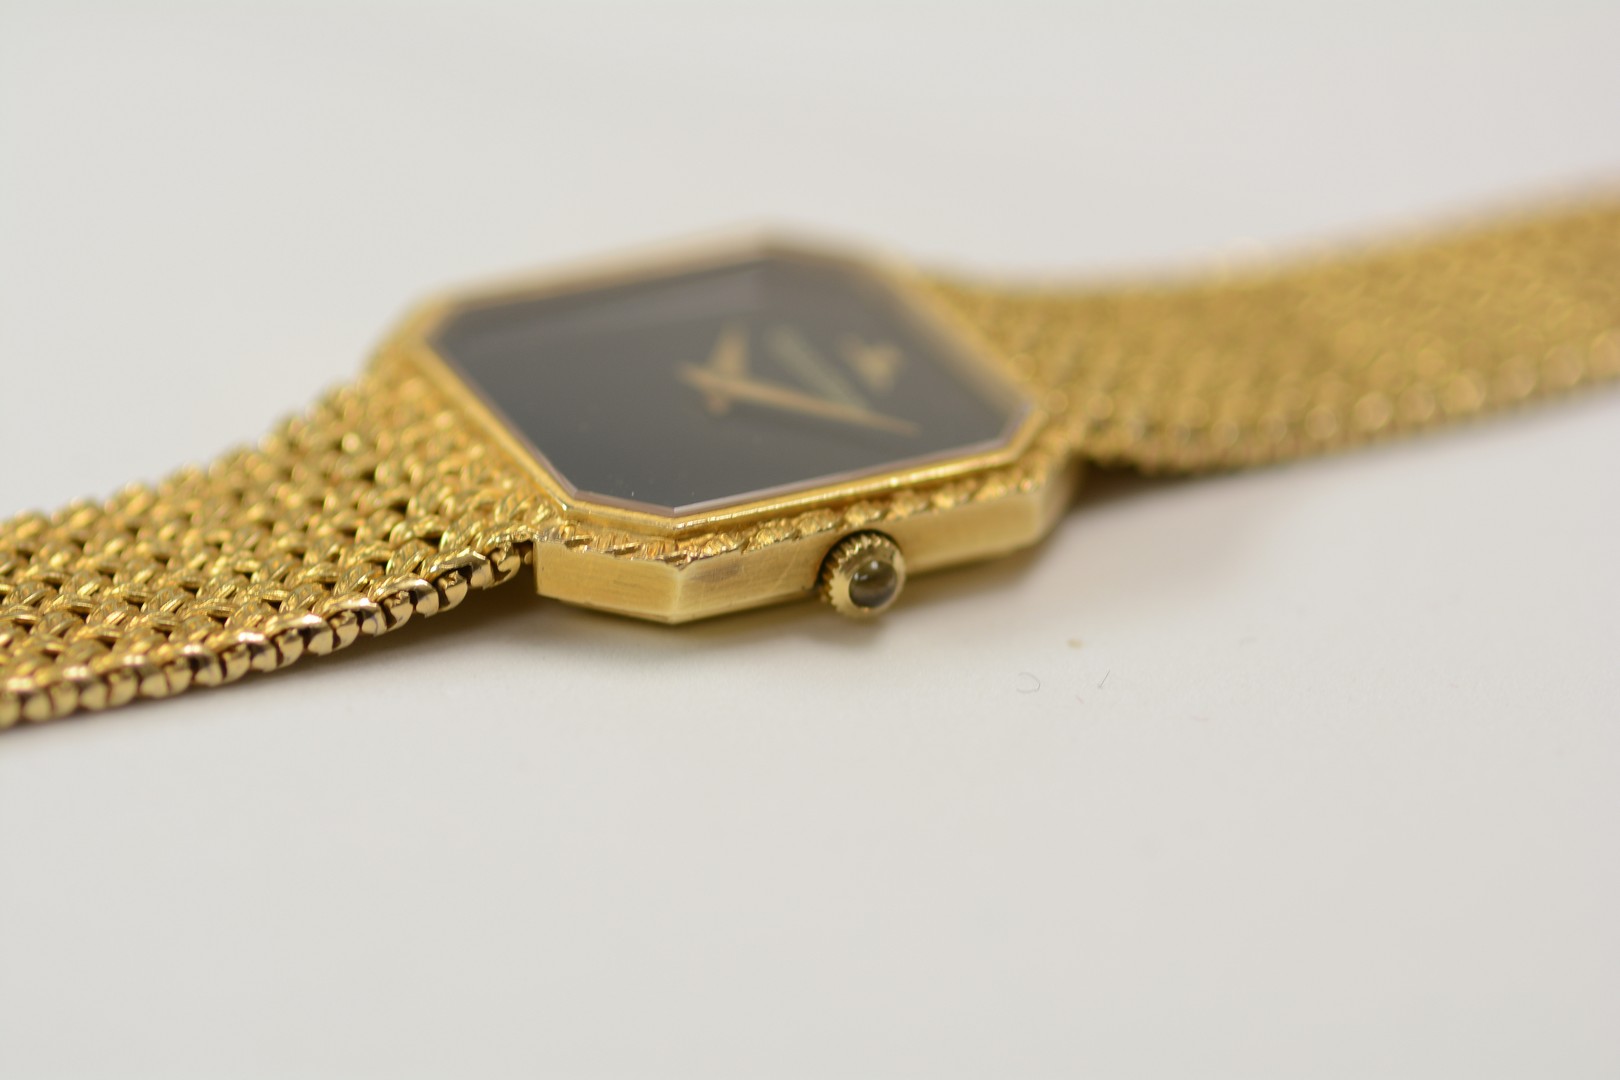 Jaeger-LeCoultre / Vintage - Unisex Yellow Gold Wristwatch - Image 9 of 14